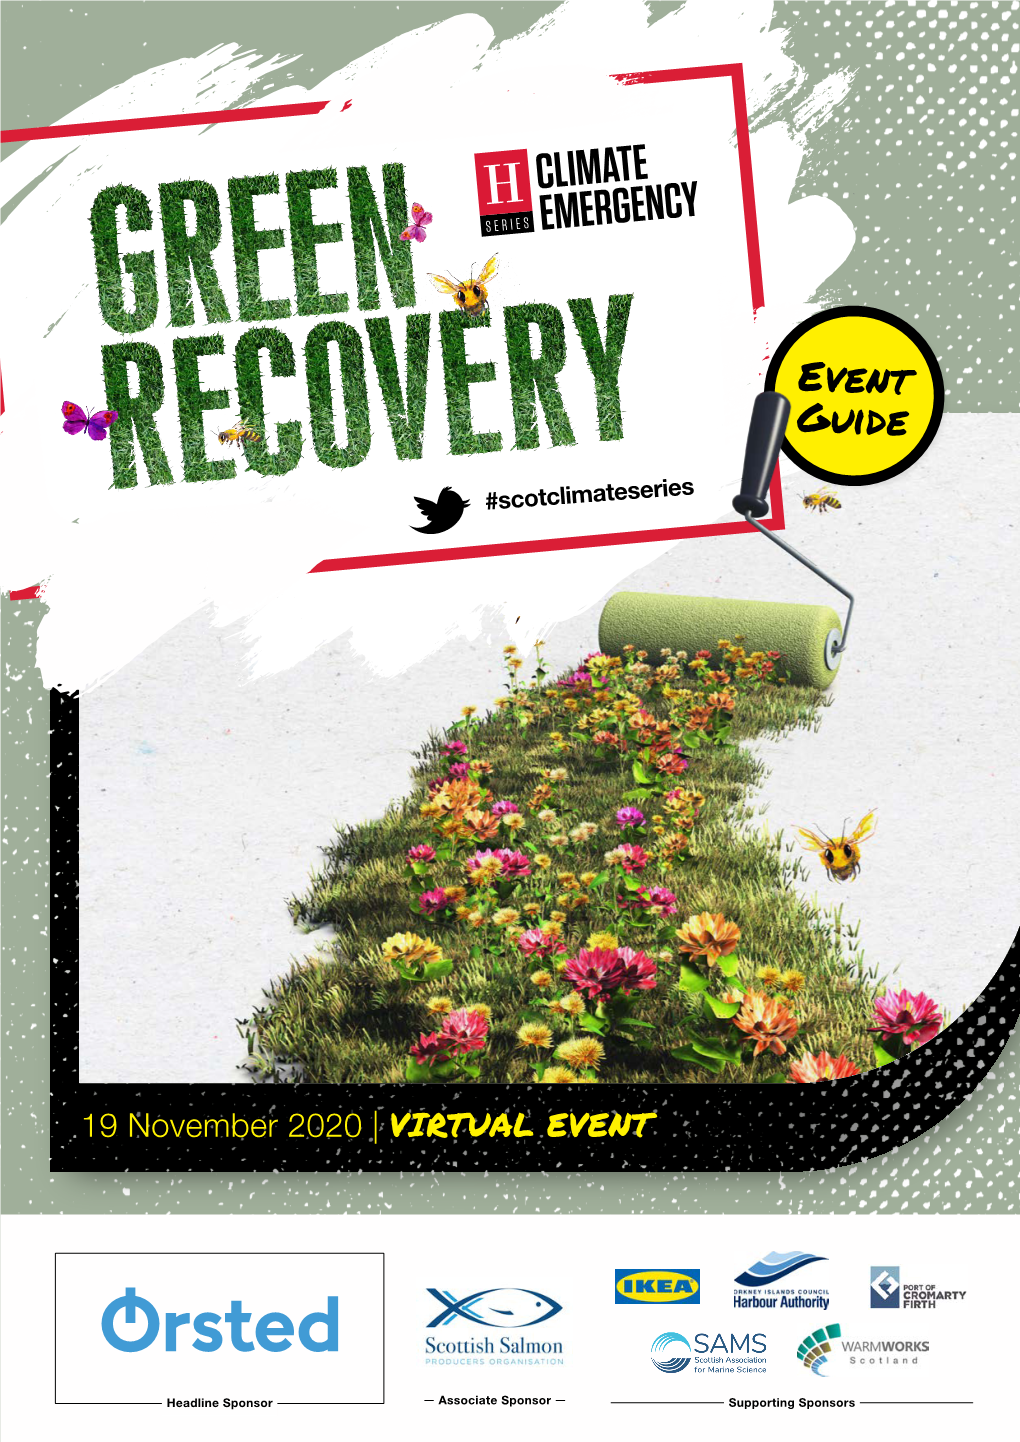 Climate Emergency Series: Green Recovery 3 #Scotclimateseries WELCOME